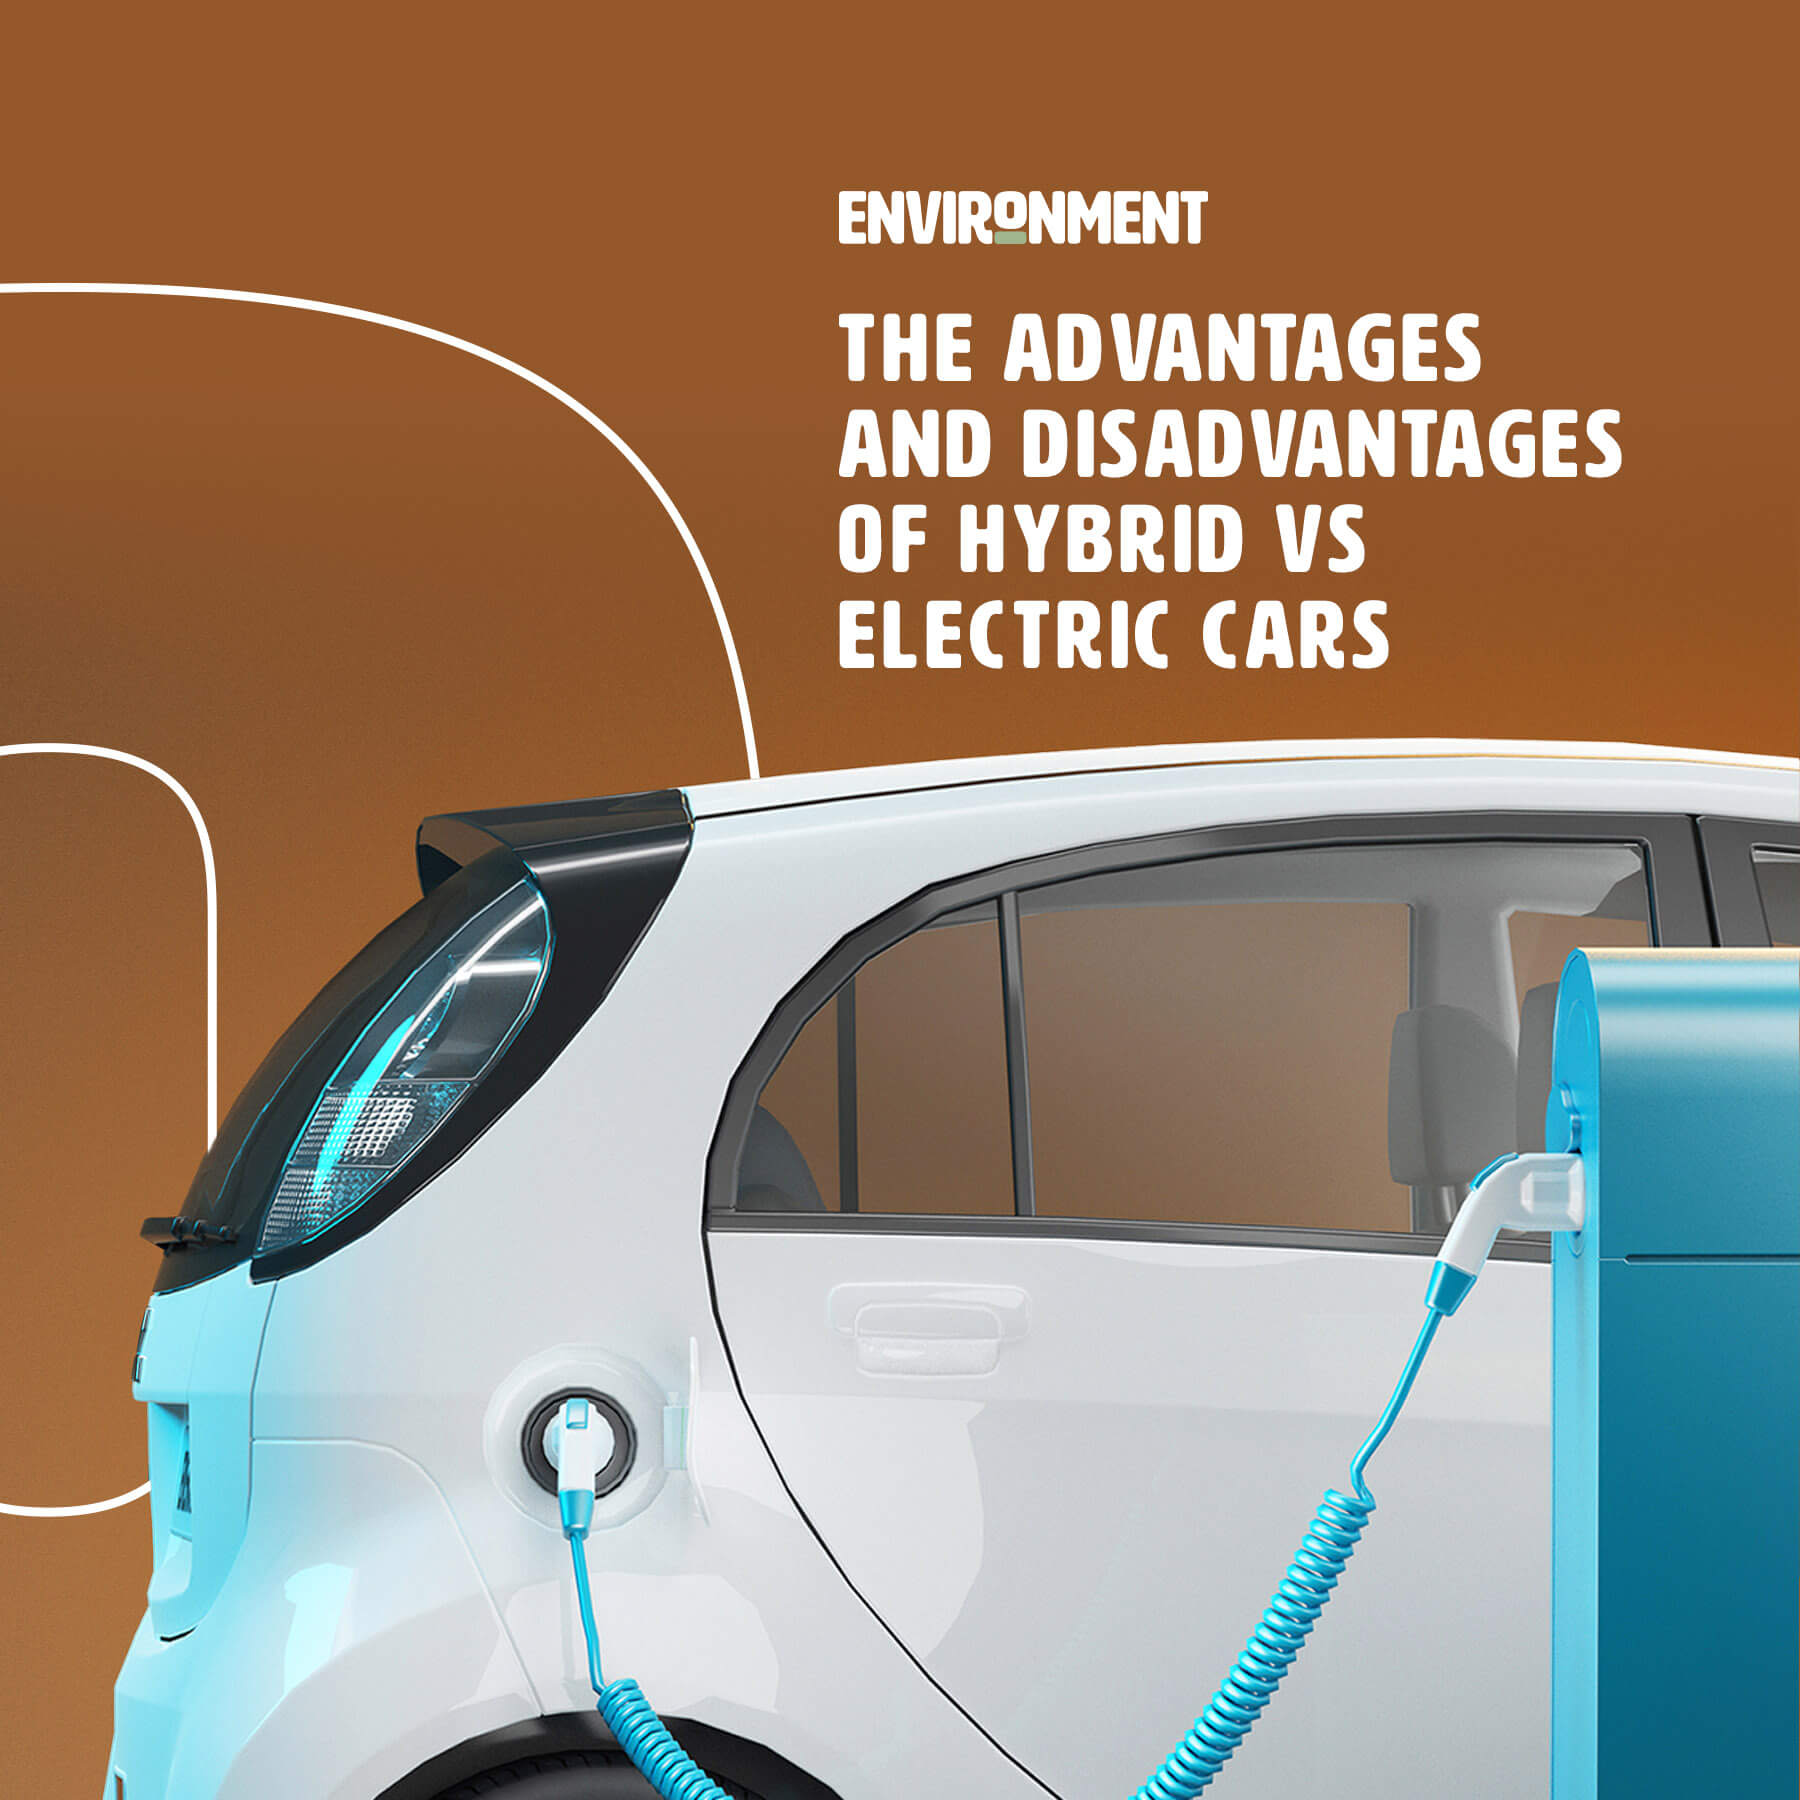 The Advantages and Disadvantages of Hybrid vs Electric Cars